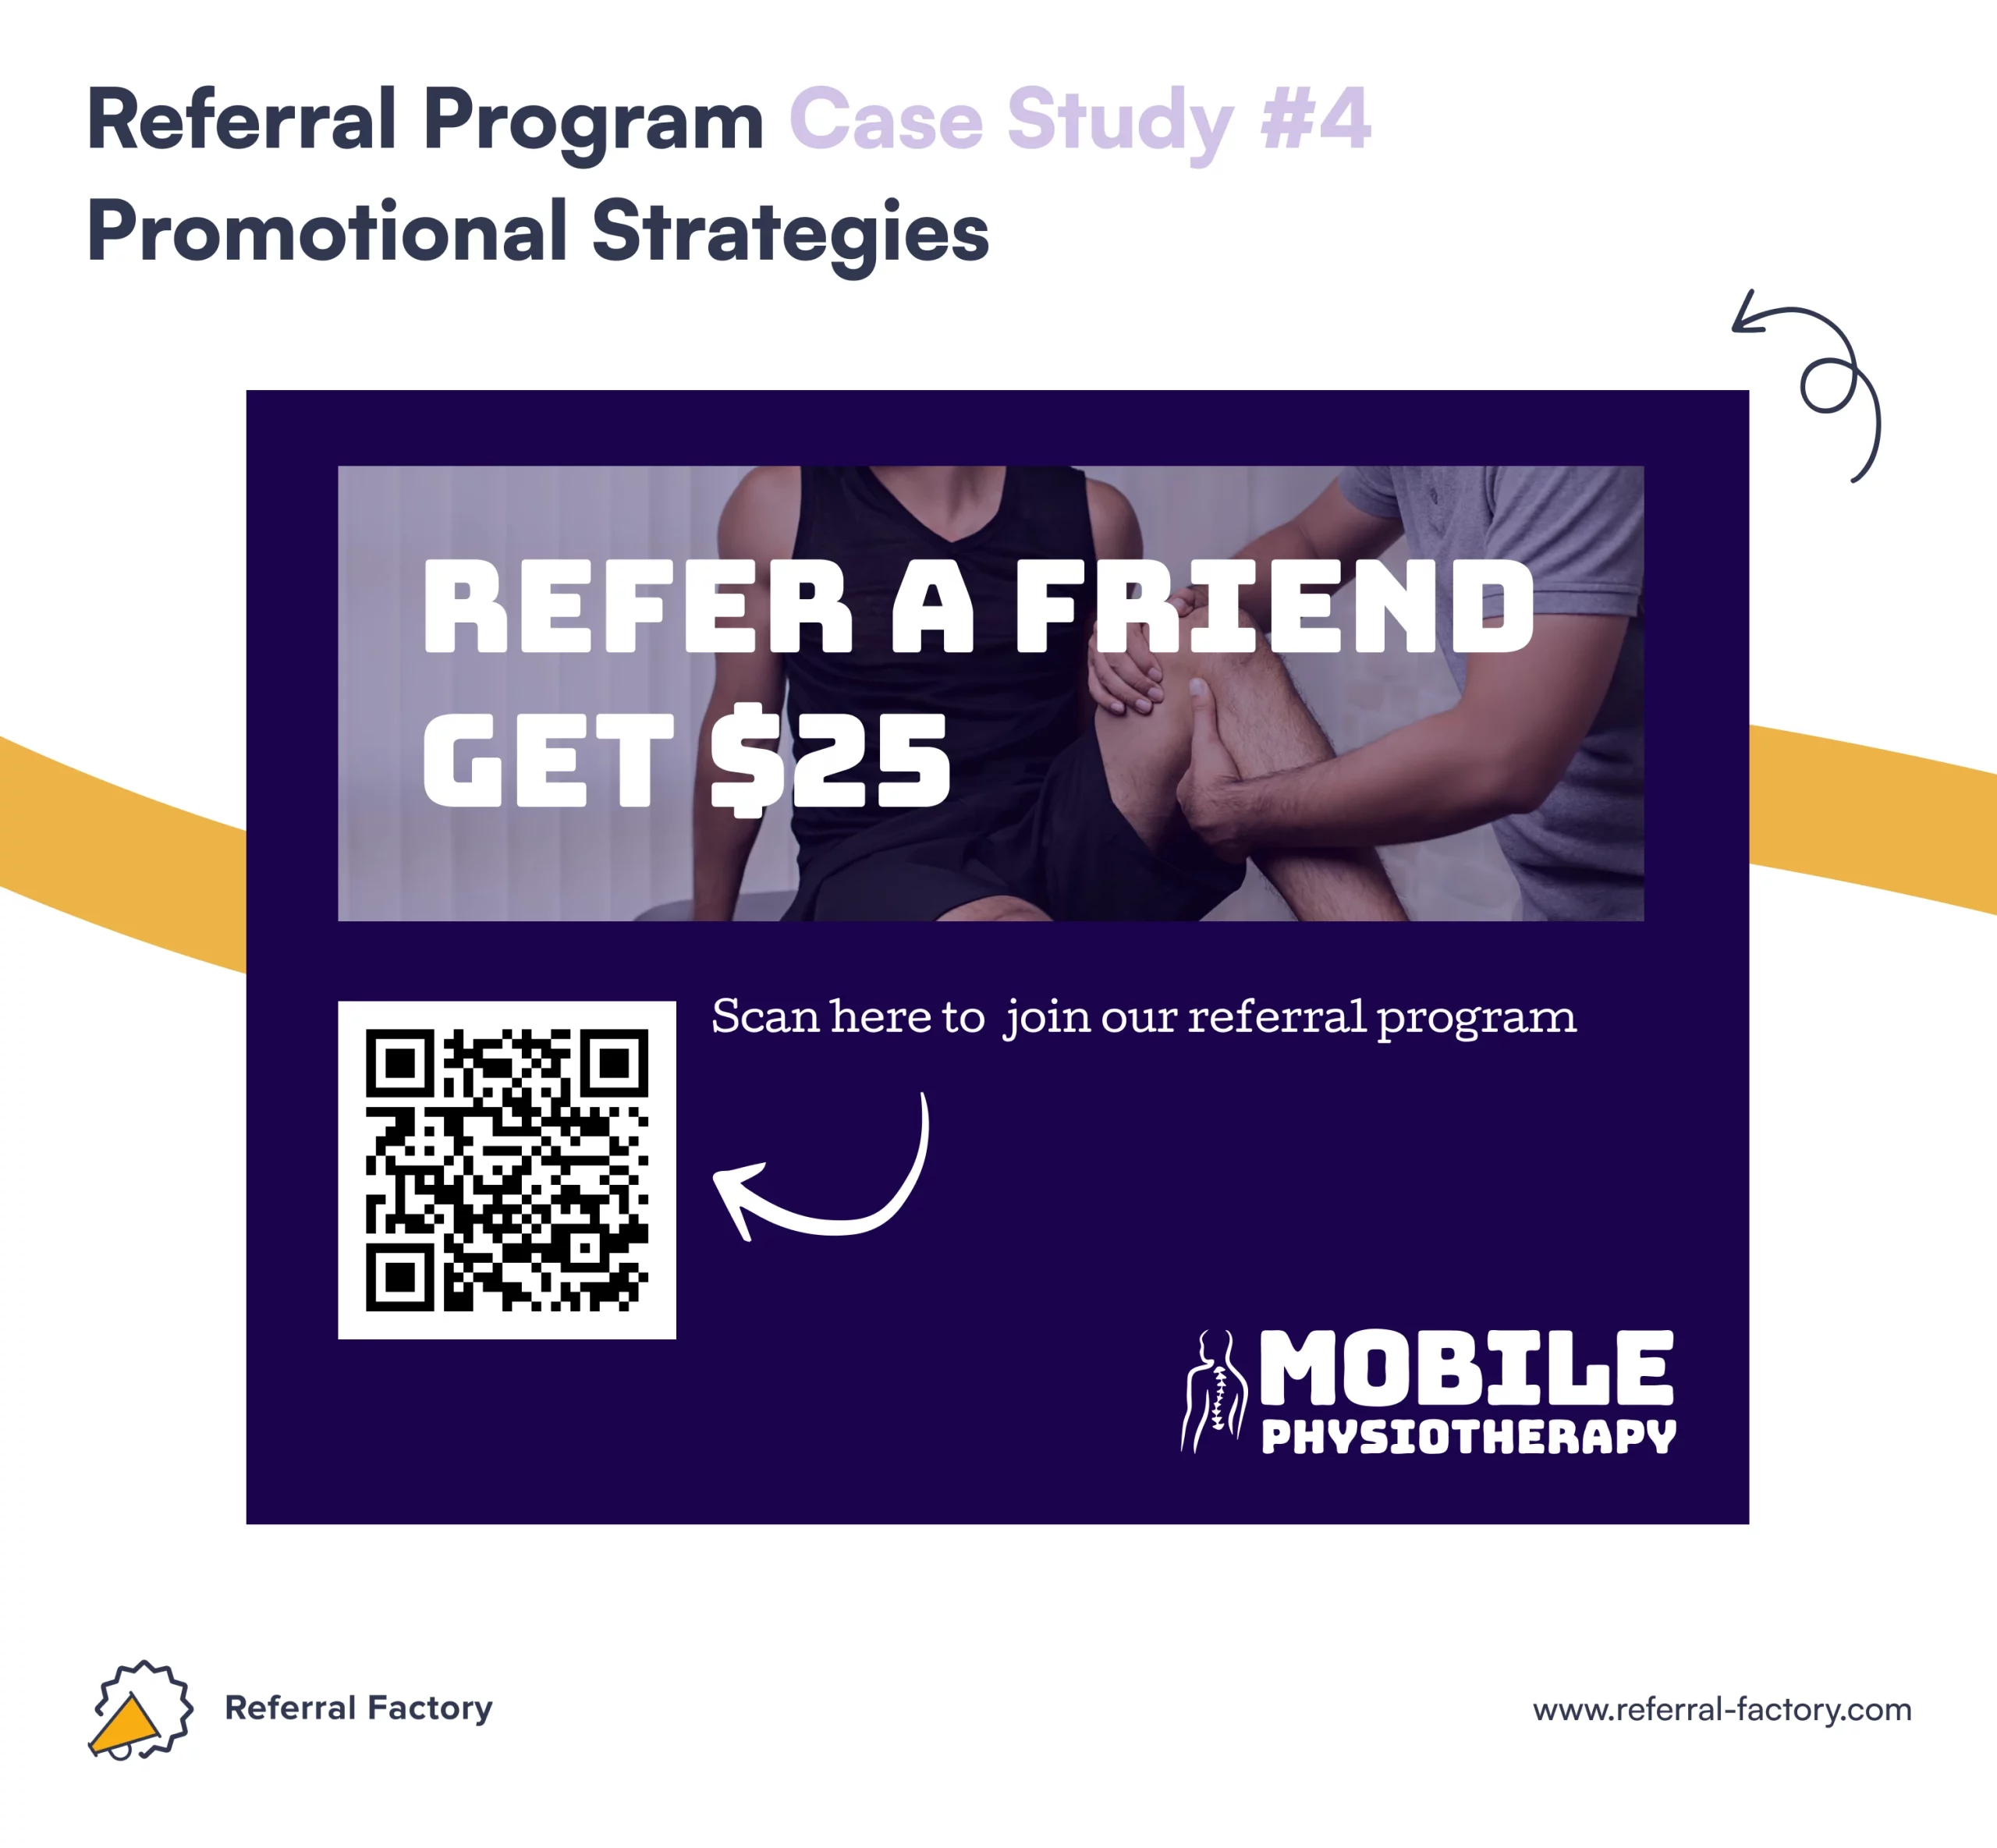 referral program case study healthcare business promotional strategies referral factory